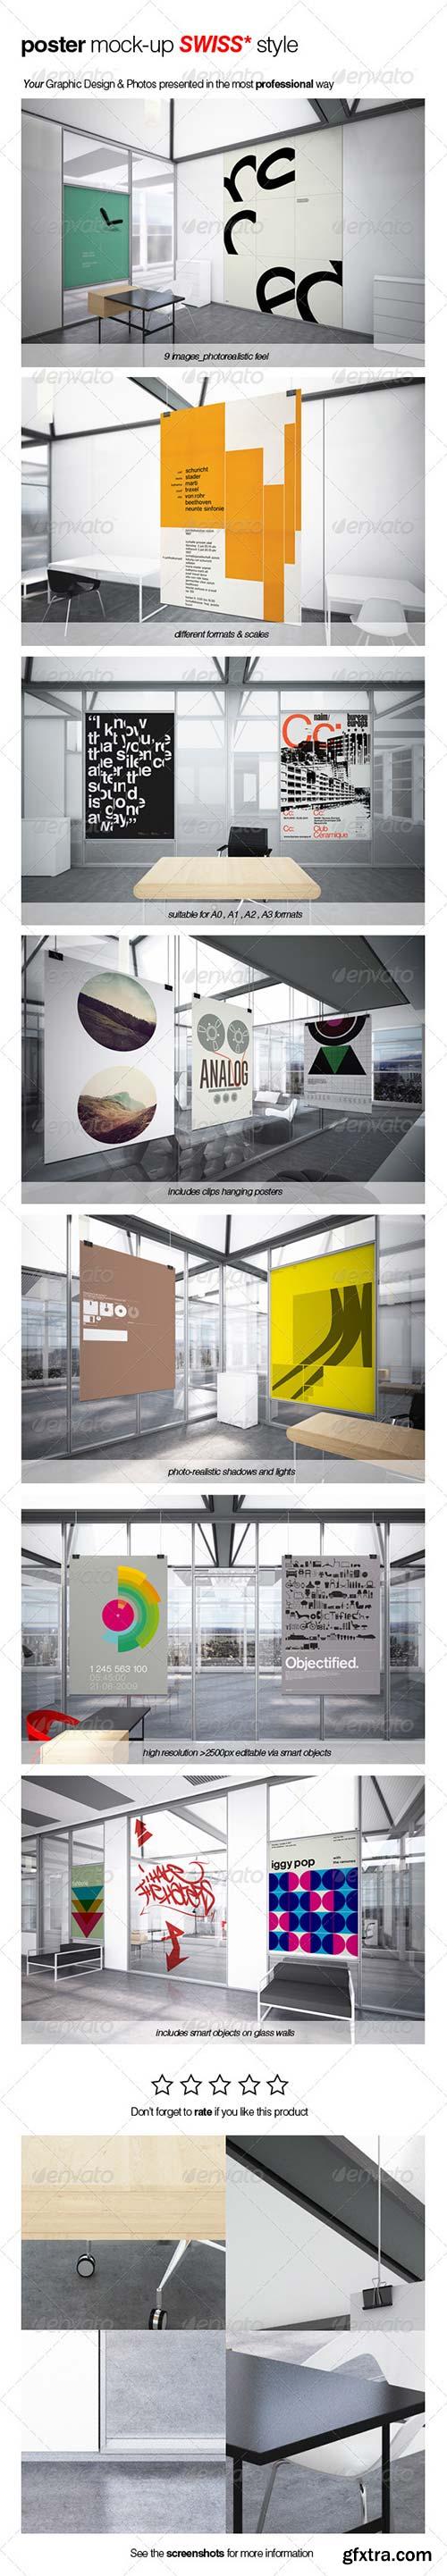 GraphicRiver - Poster Mock-up SWISS Style